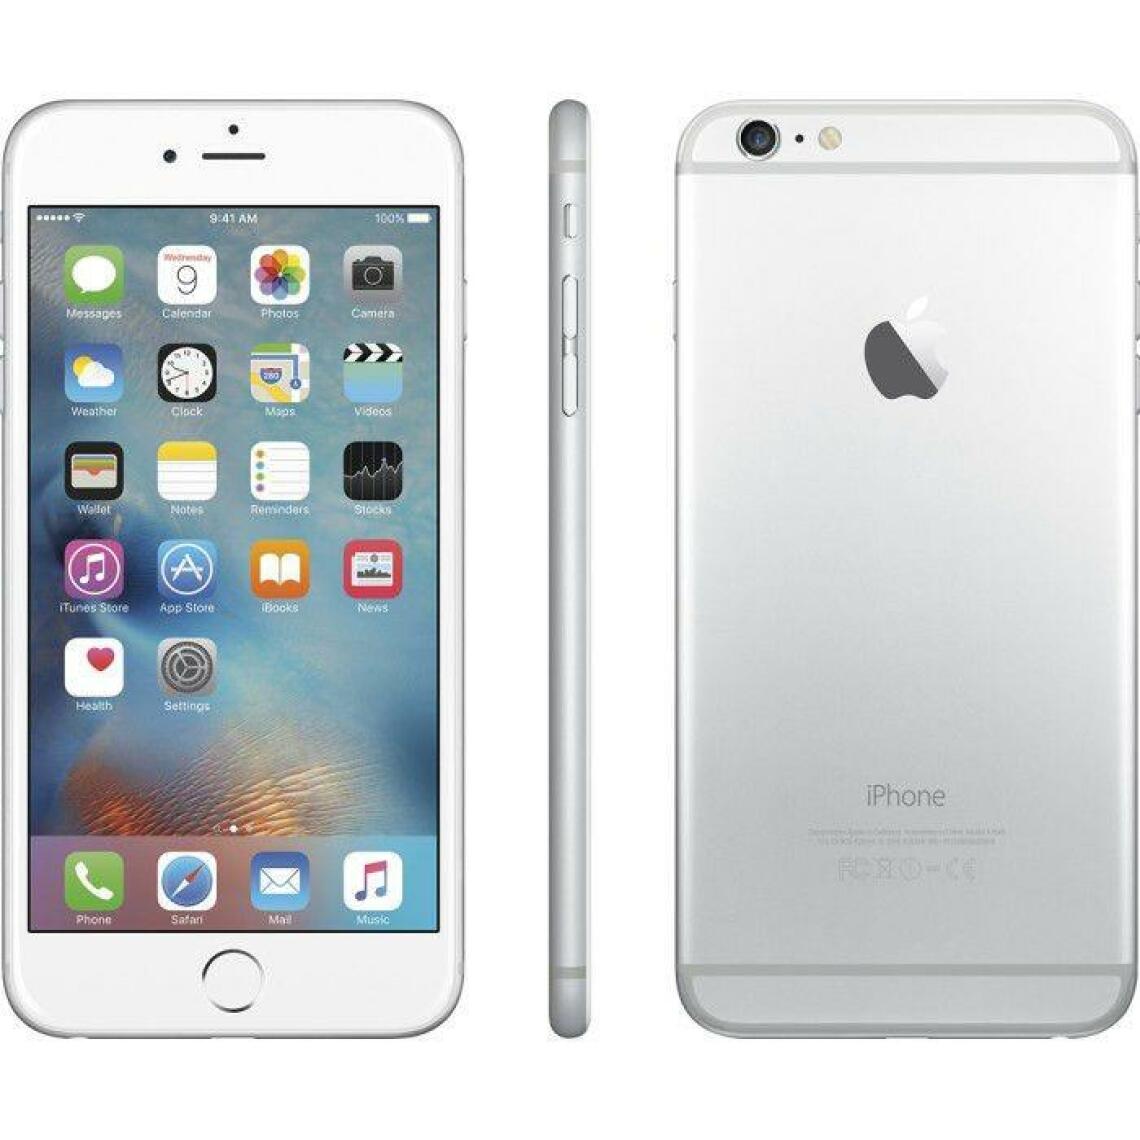 Apple - iPhone 6 - 64 Go Argent A1586 GSM MG4H2B/A - Débloqué - Smartphone Android